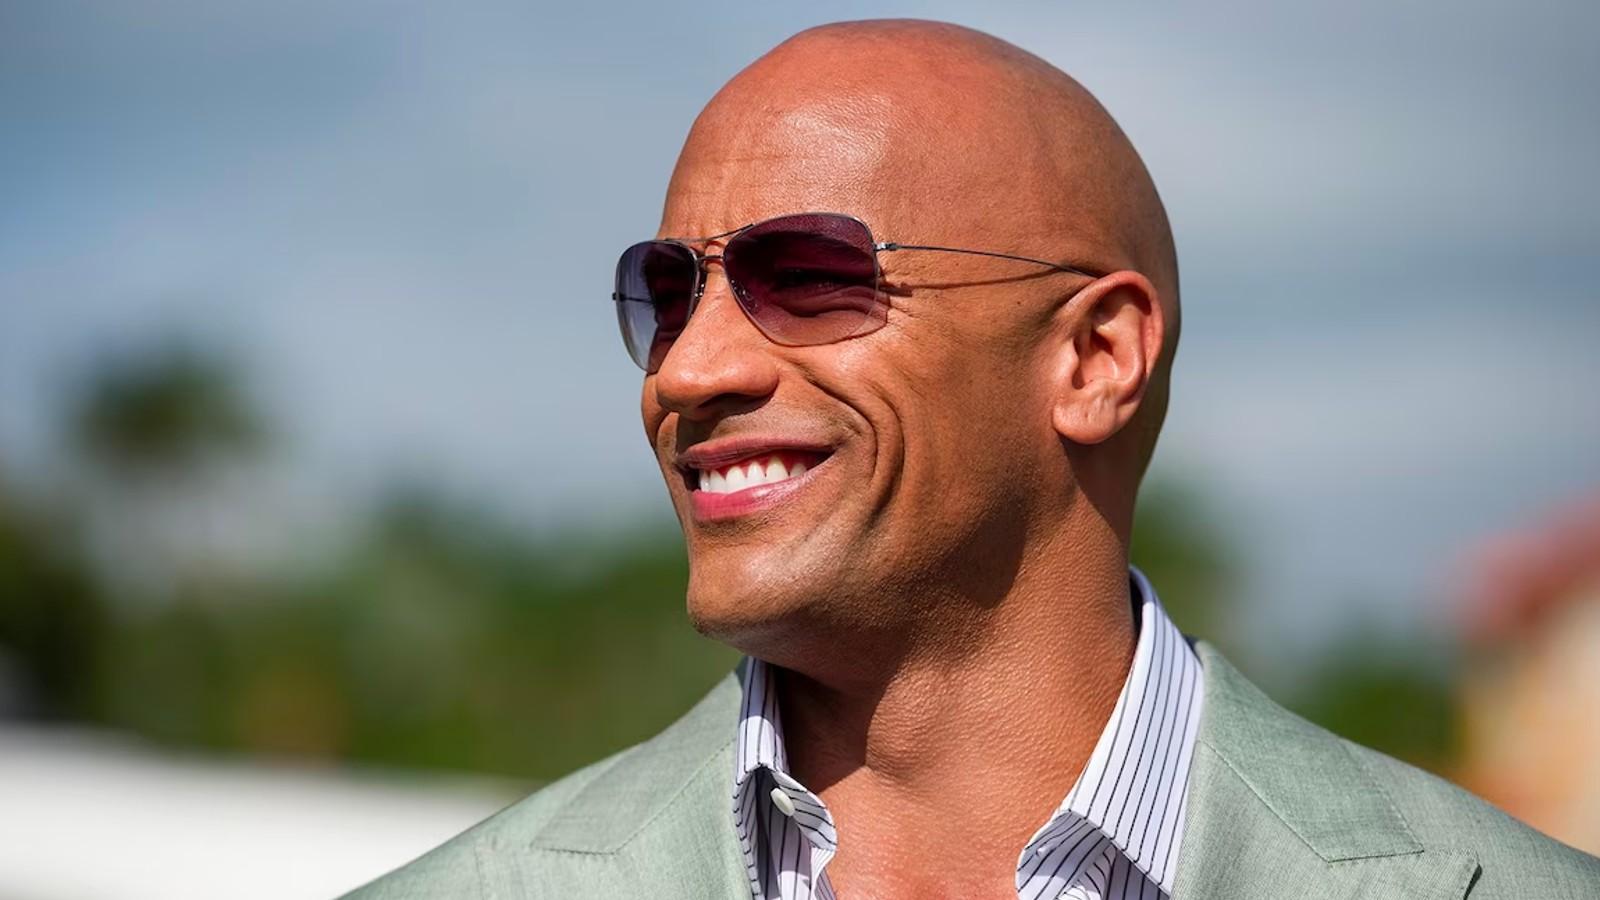 Ballers' on Netflix: Release Date, Synopsis, and More Details - Netflix  Tudum